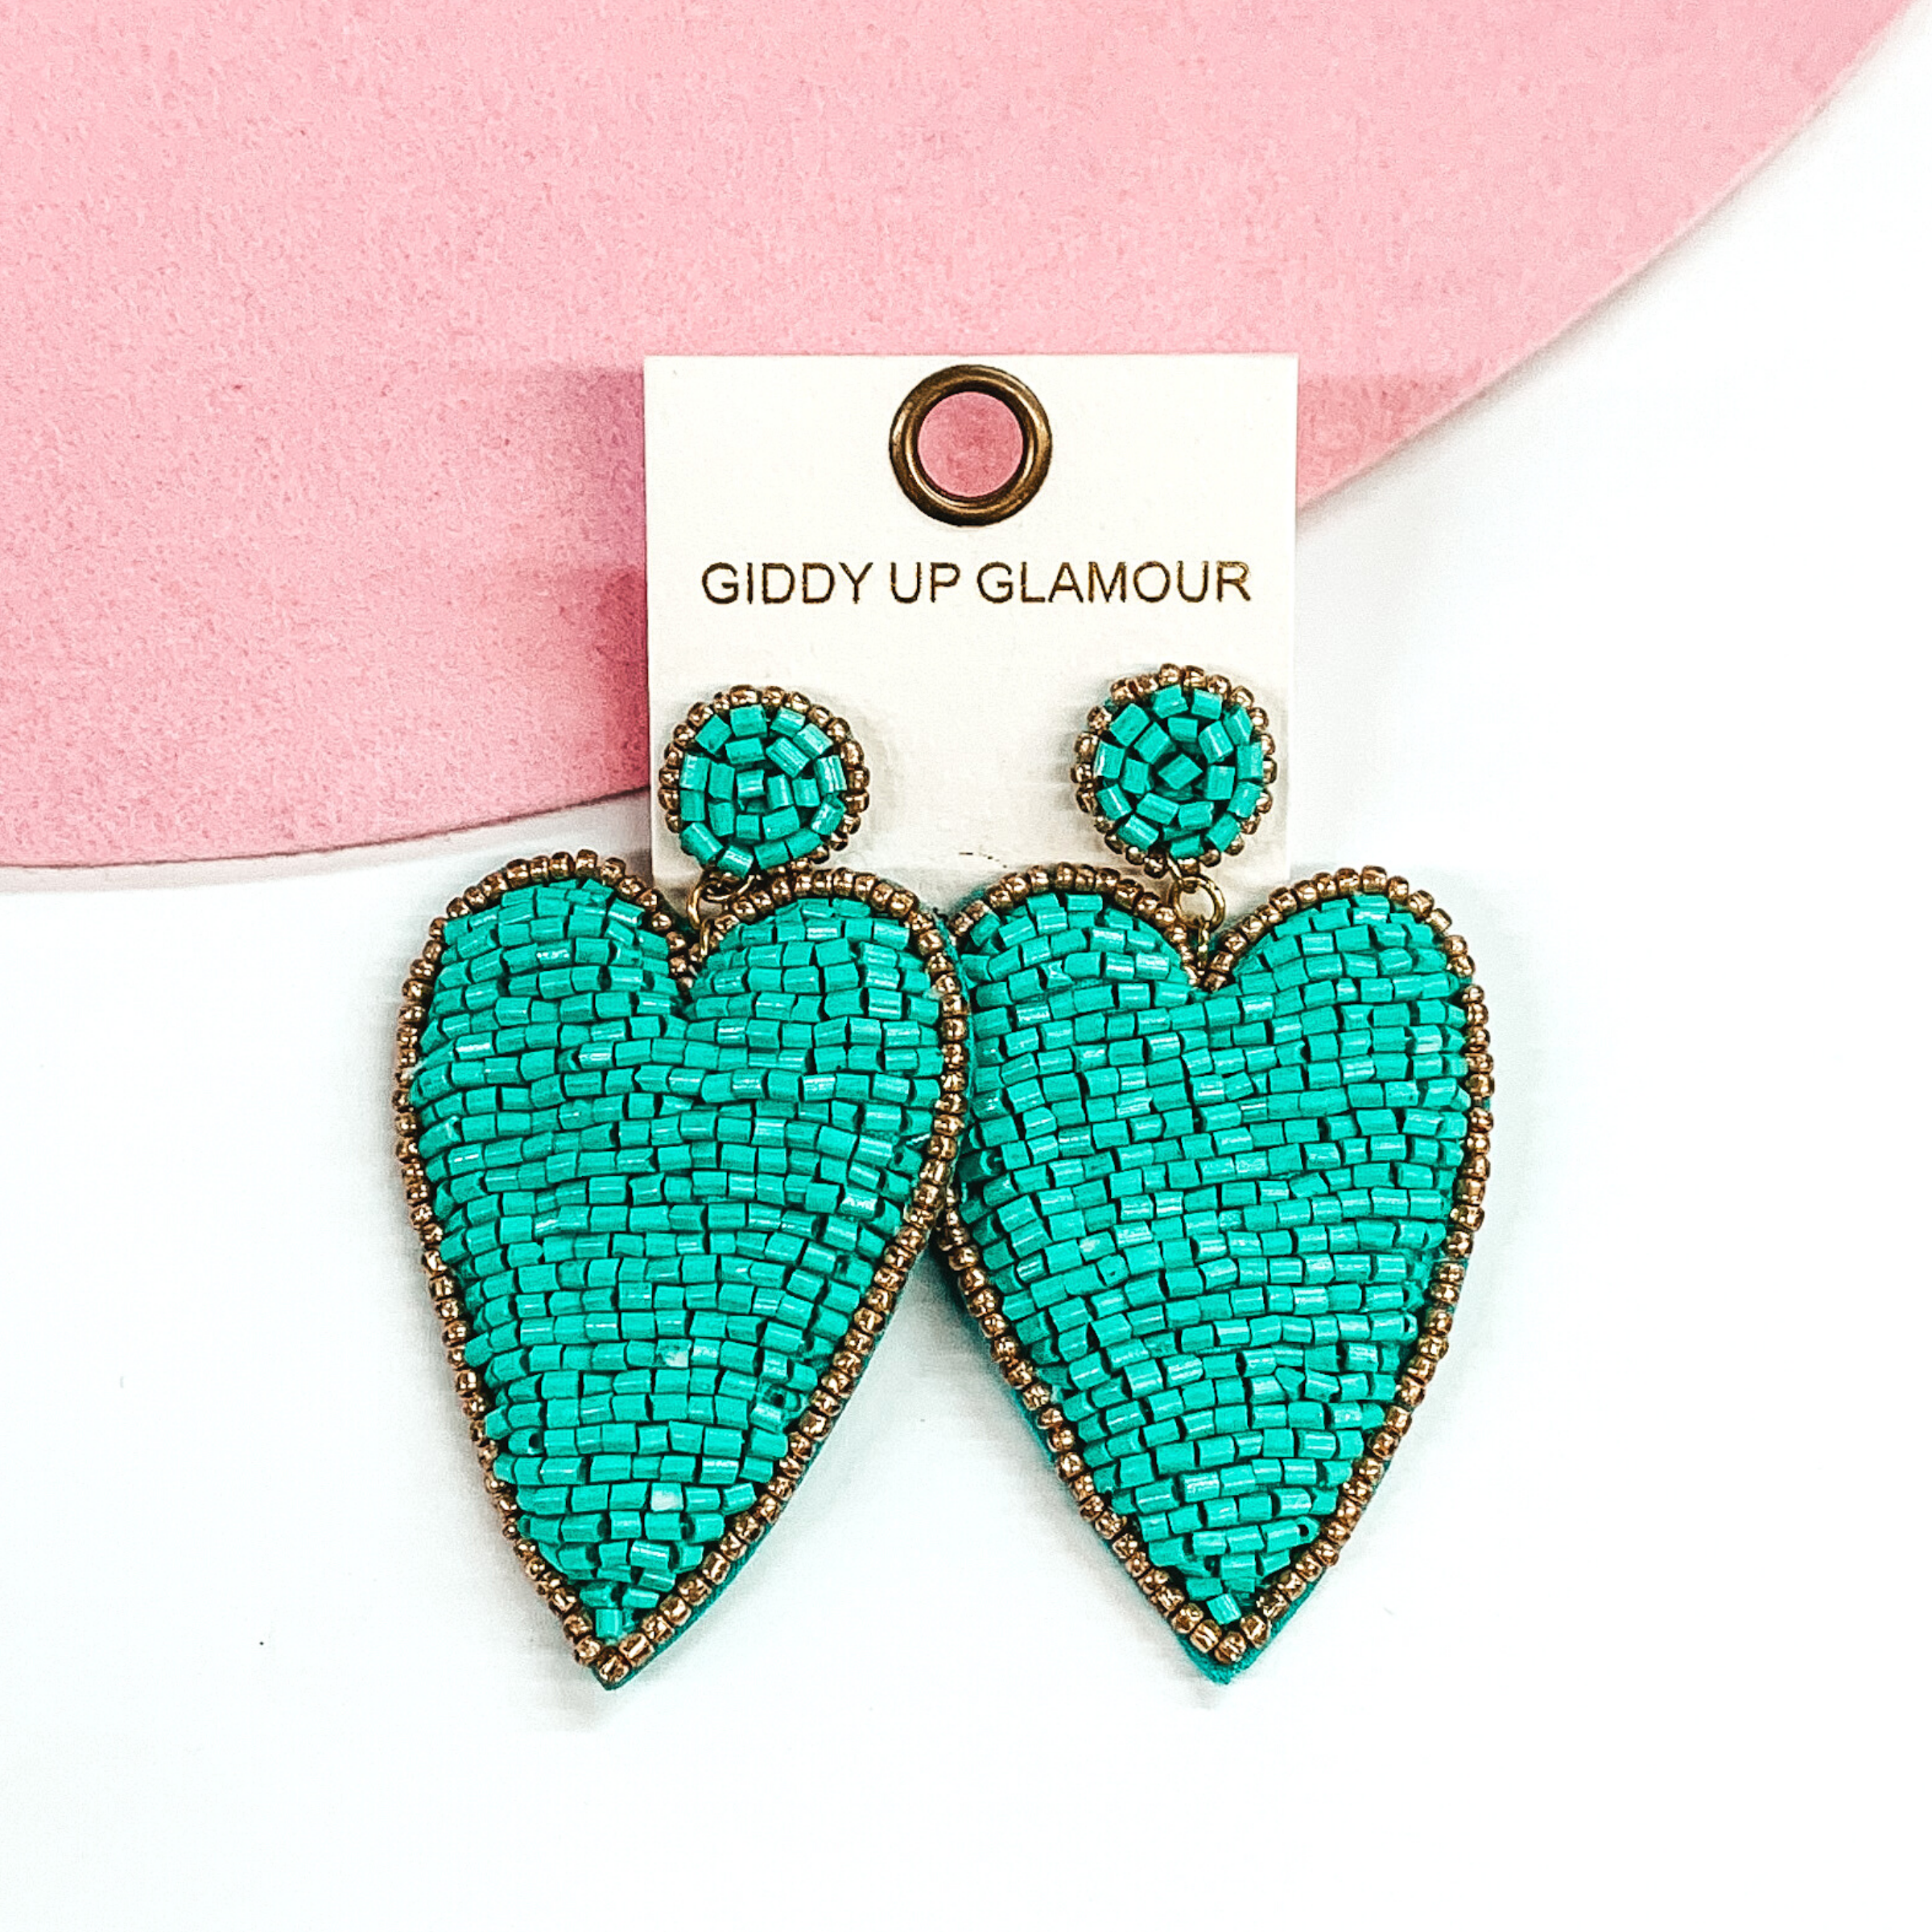 Small circle post studs with a dangle heart. These earrings are covered in turquoise beads with a gold outline. These earrings are pictured on a white and pink background.